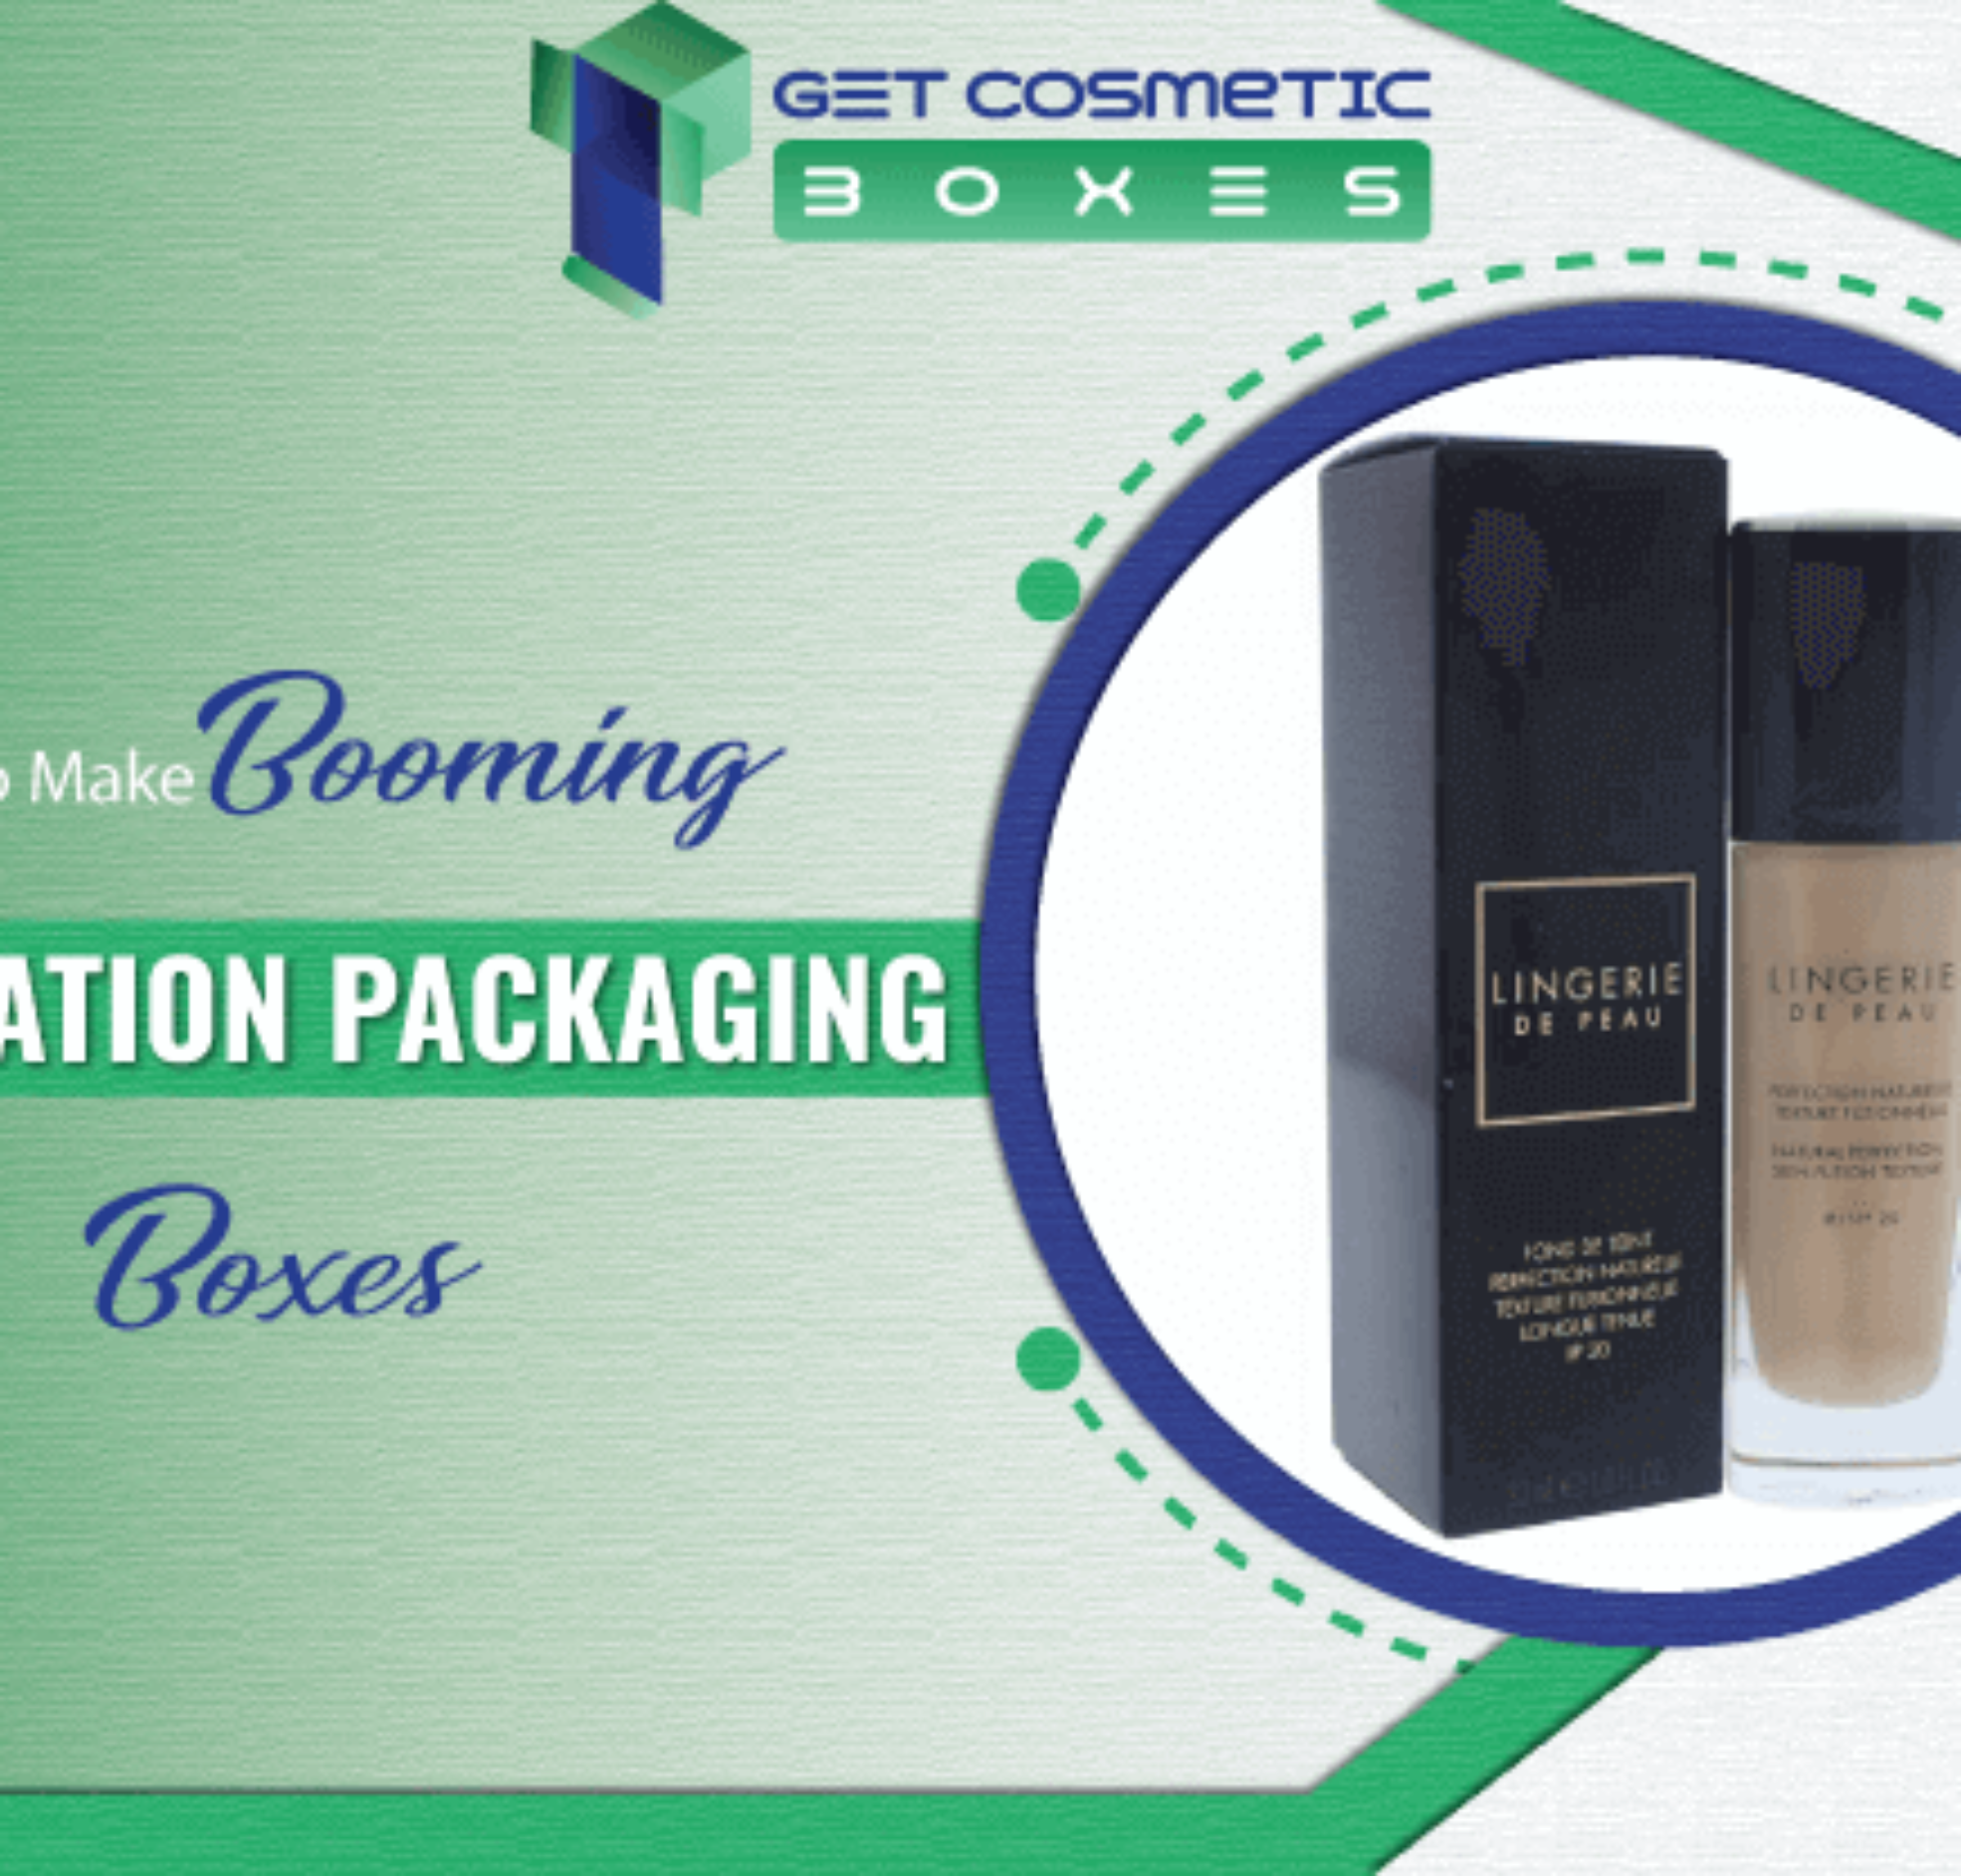 Foundation-Packaging-Boxes